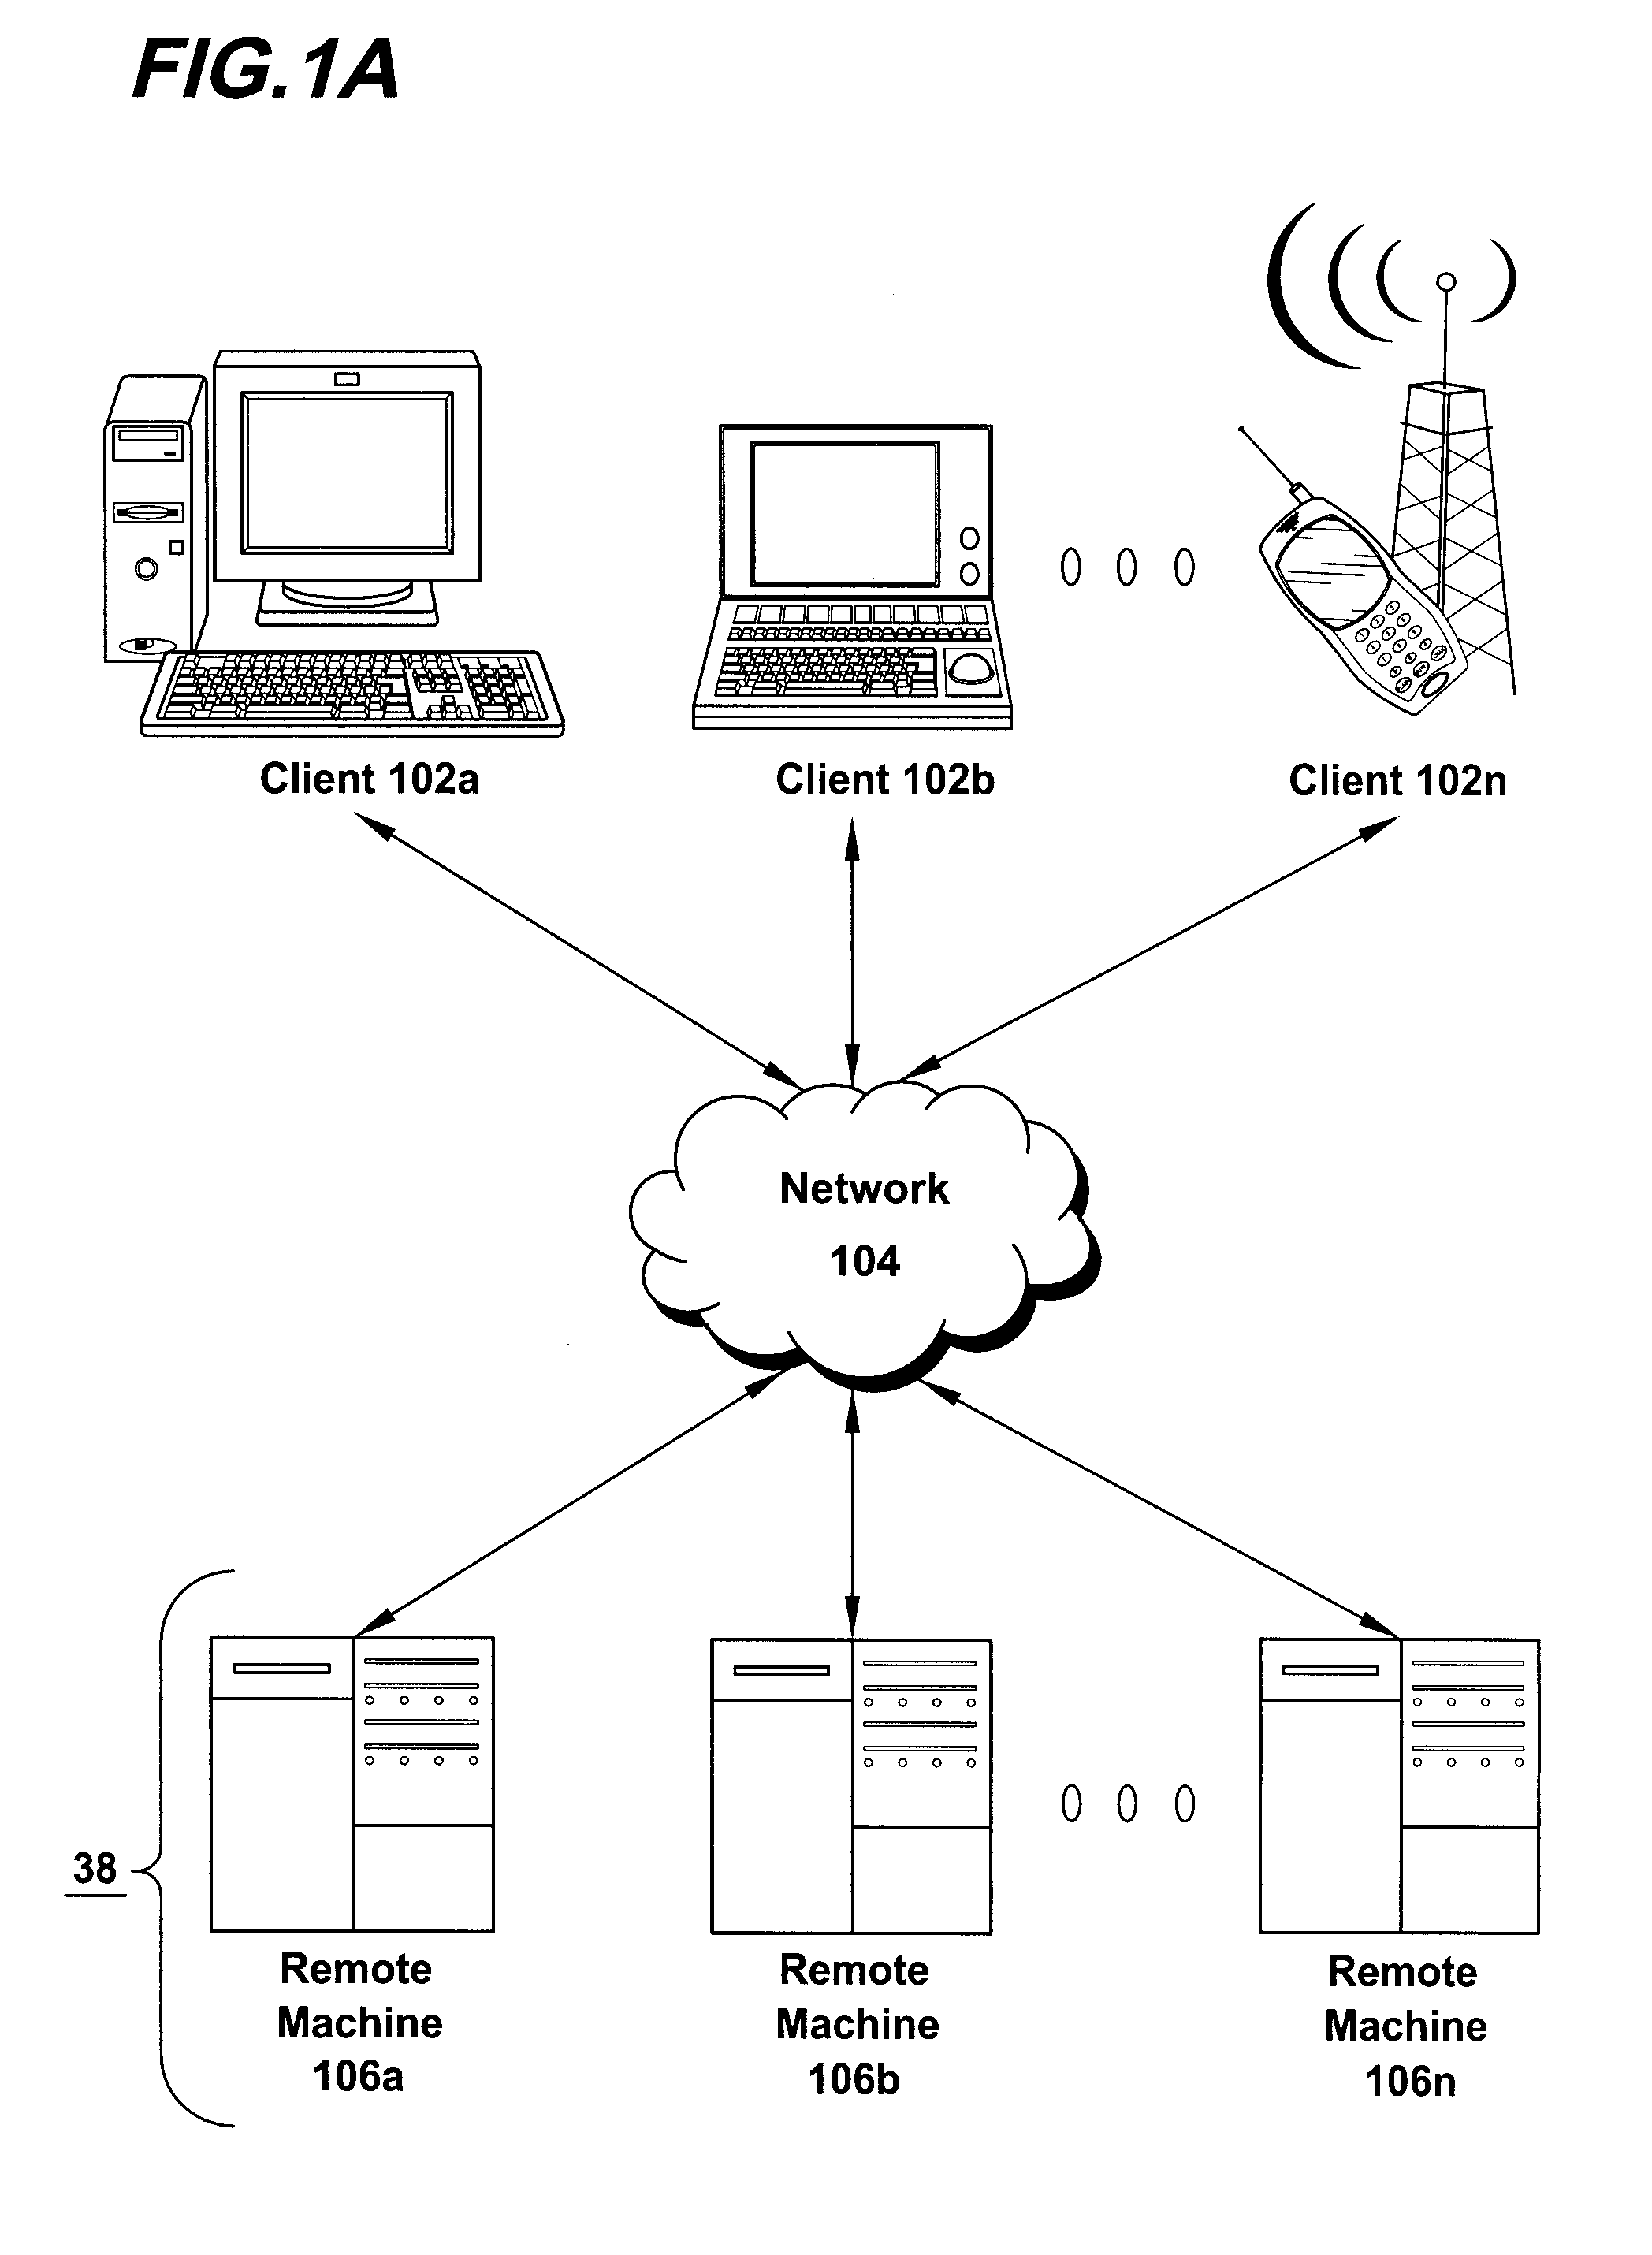 Systems and Methods to Adaptively Load Balance User Sessions to Reduce Energy Consumption